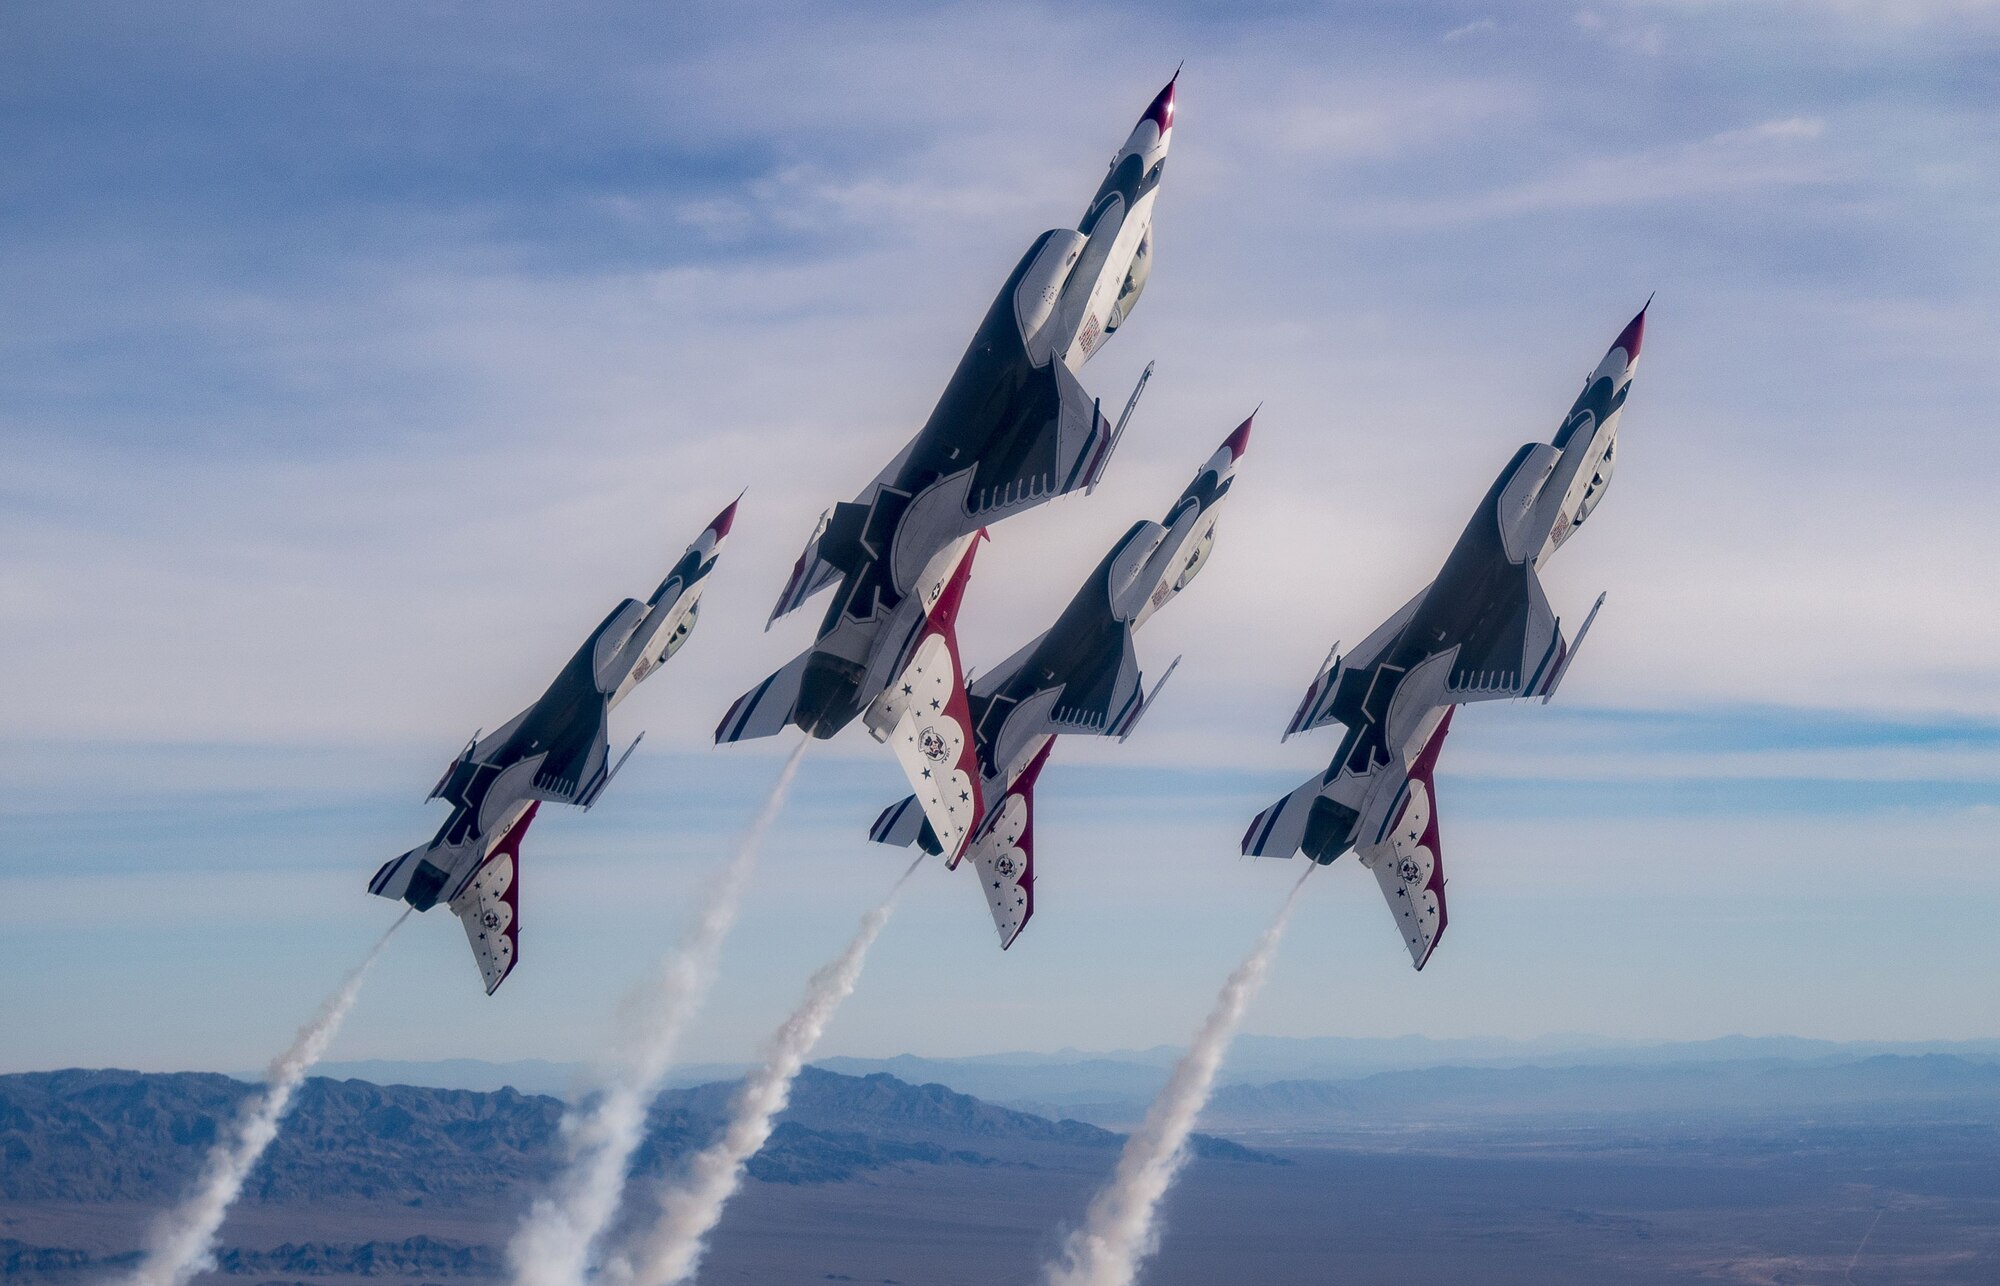 The Thunderbirds Diamond formation pilots transition during a Line Break Loop maneuver over the Nevada Test and Training Range during a training flight, Jan. 29, 2018. The Diamond formation exhibits the precision and skill to fly in close formation. (U.S. Air Force photo by Tech. Sgt. Christopher Boitz)